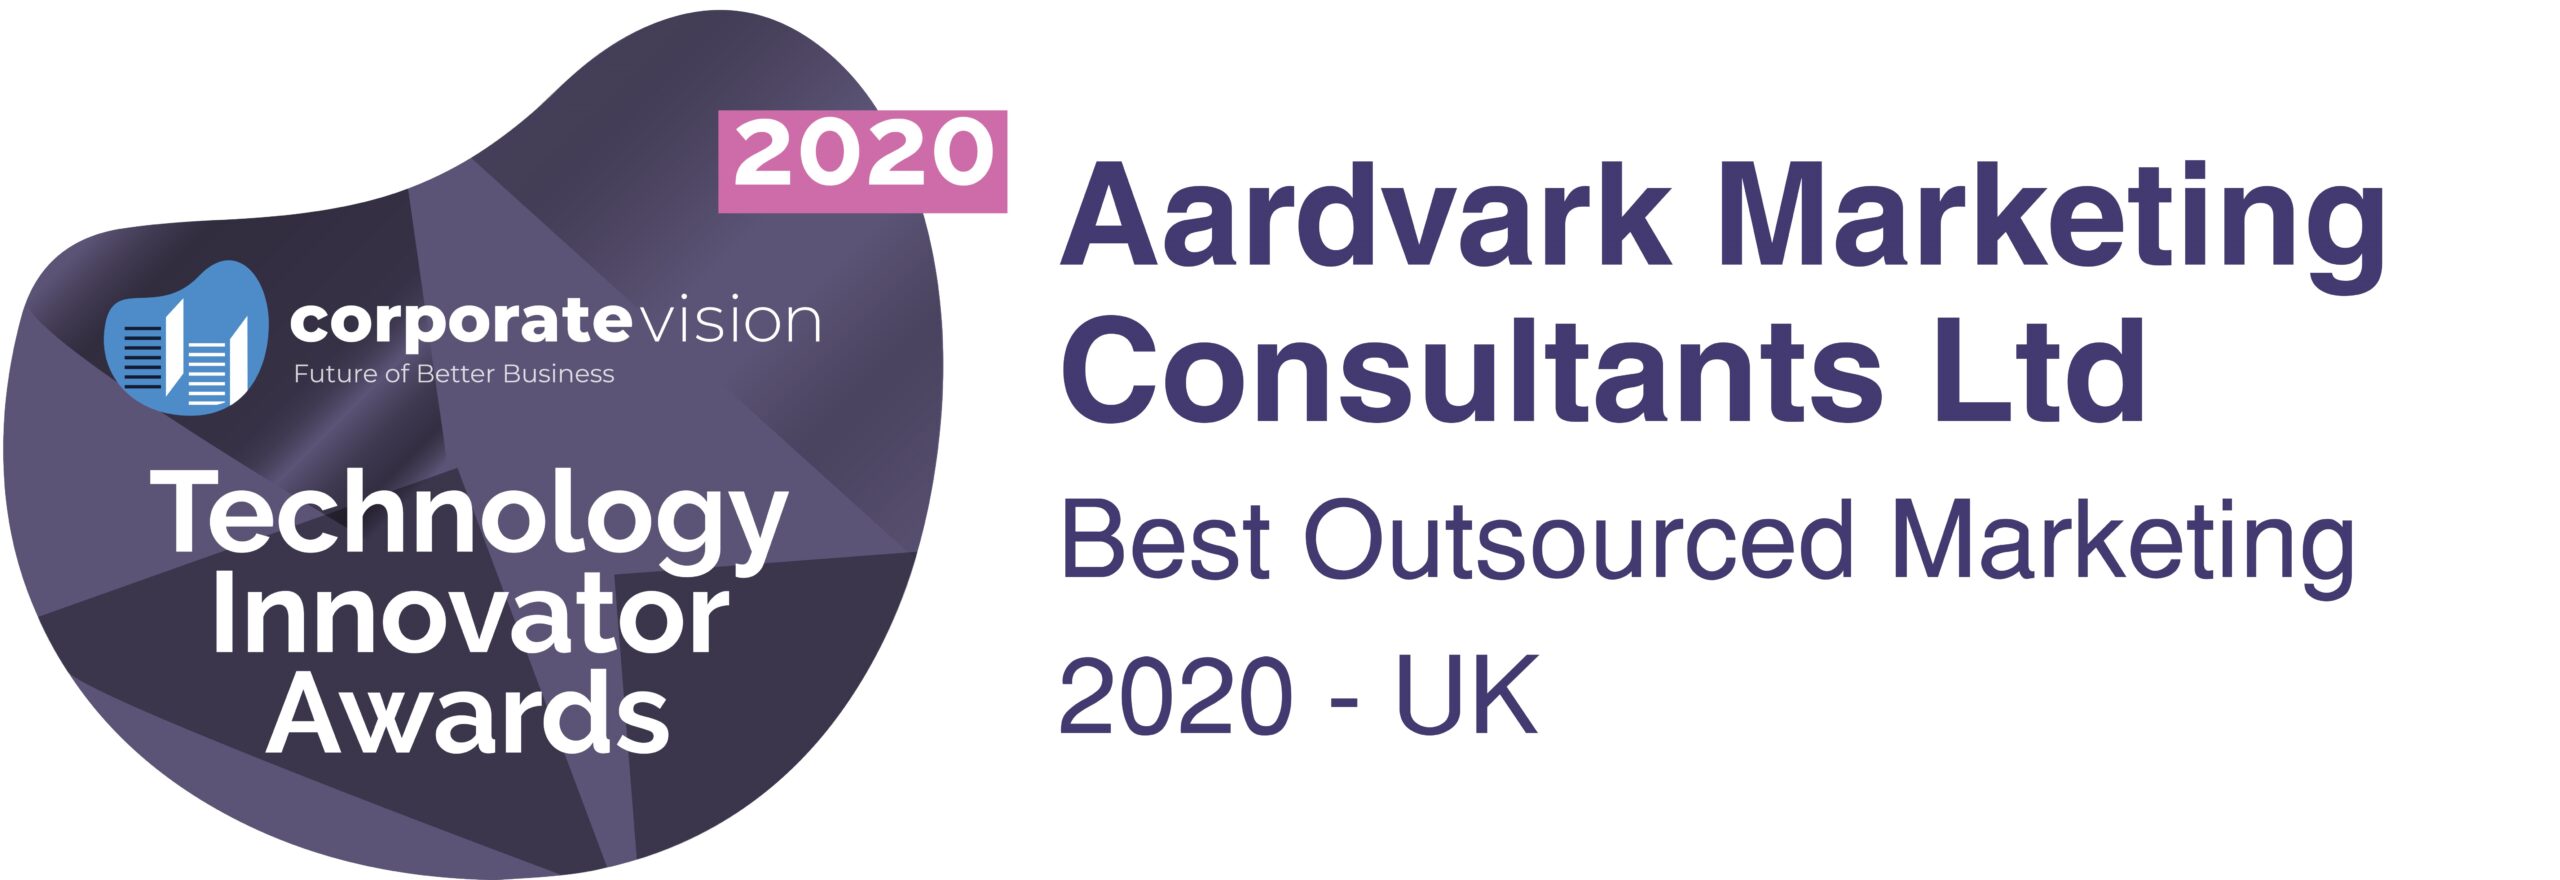 Aardvark outsourced marketing service win Technology Innovator award for 5th consecutive year